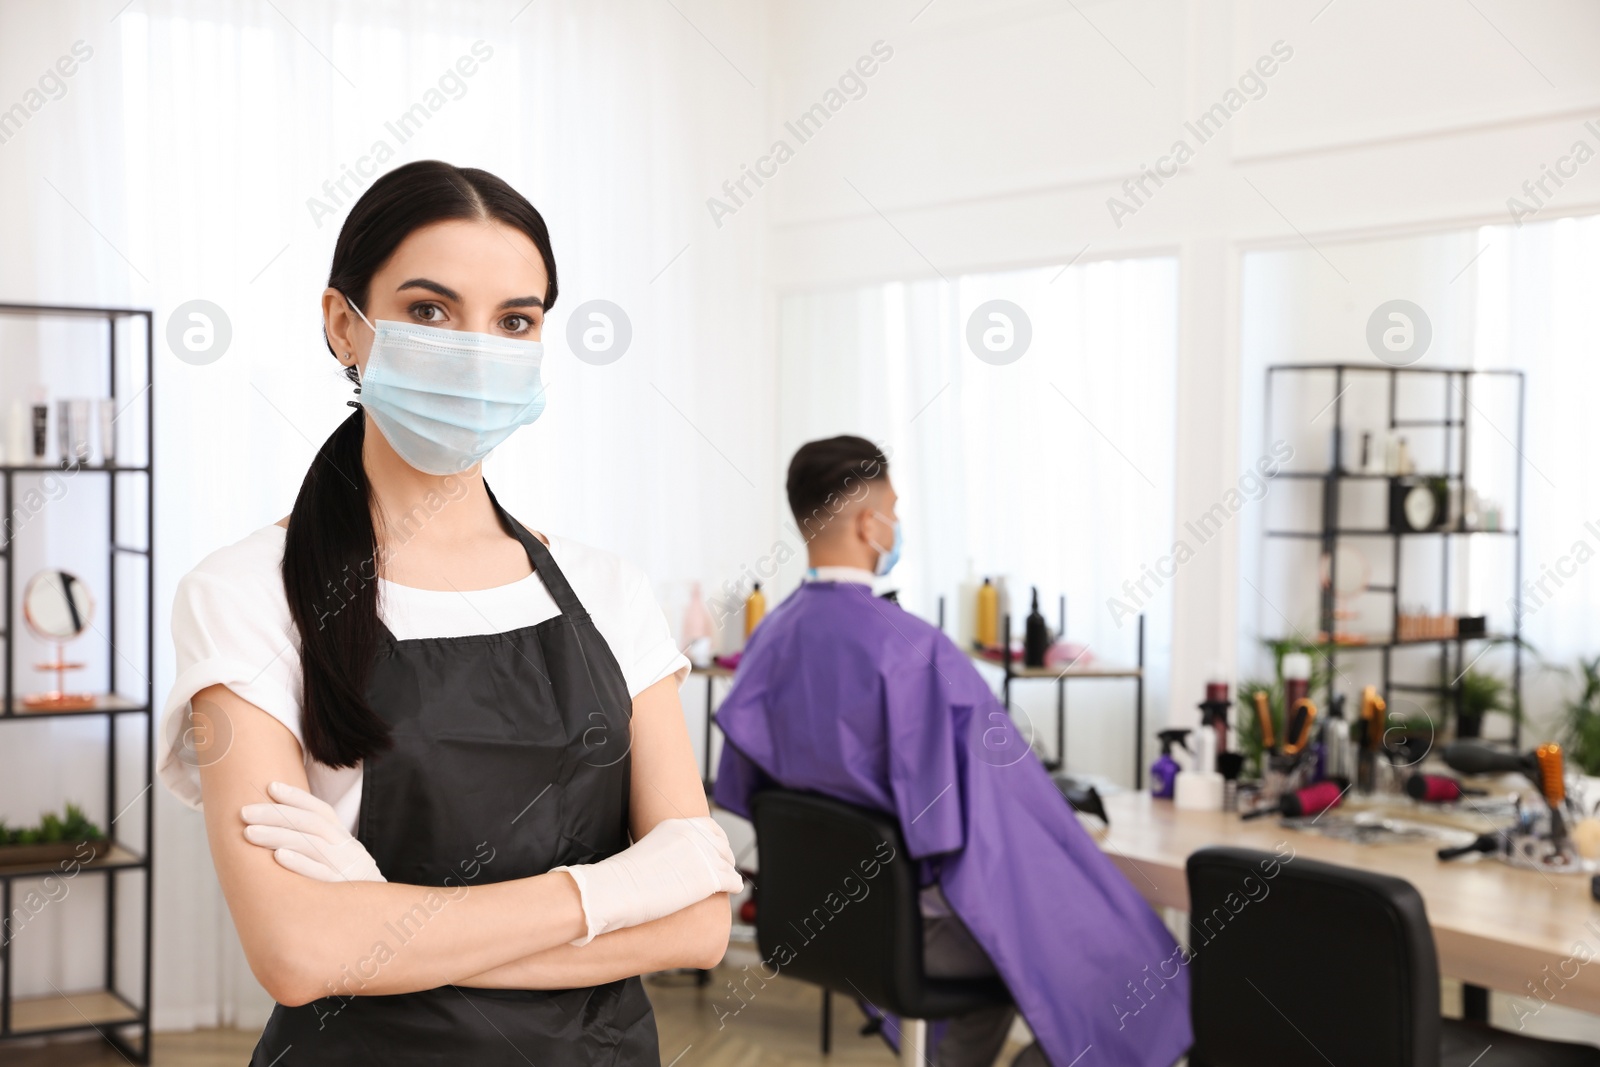 Photo of Professional stylist with protective mask in salon, space for text. Hairdressing services during Coronavirus quarantine